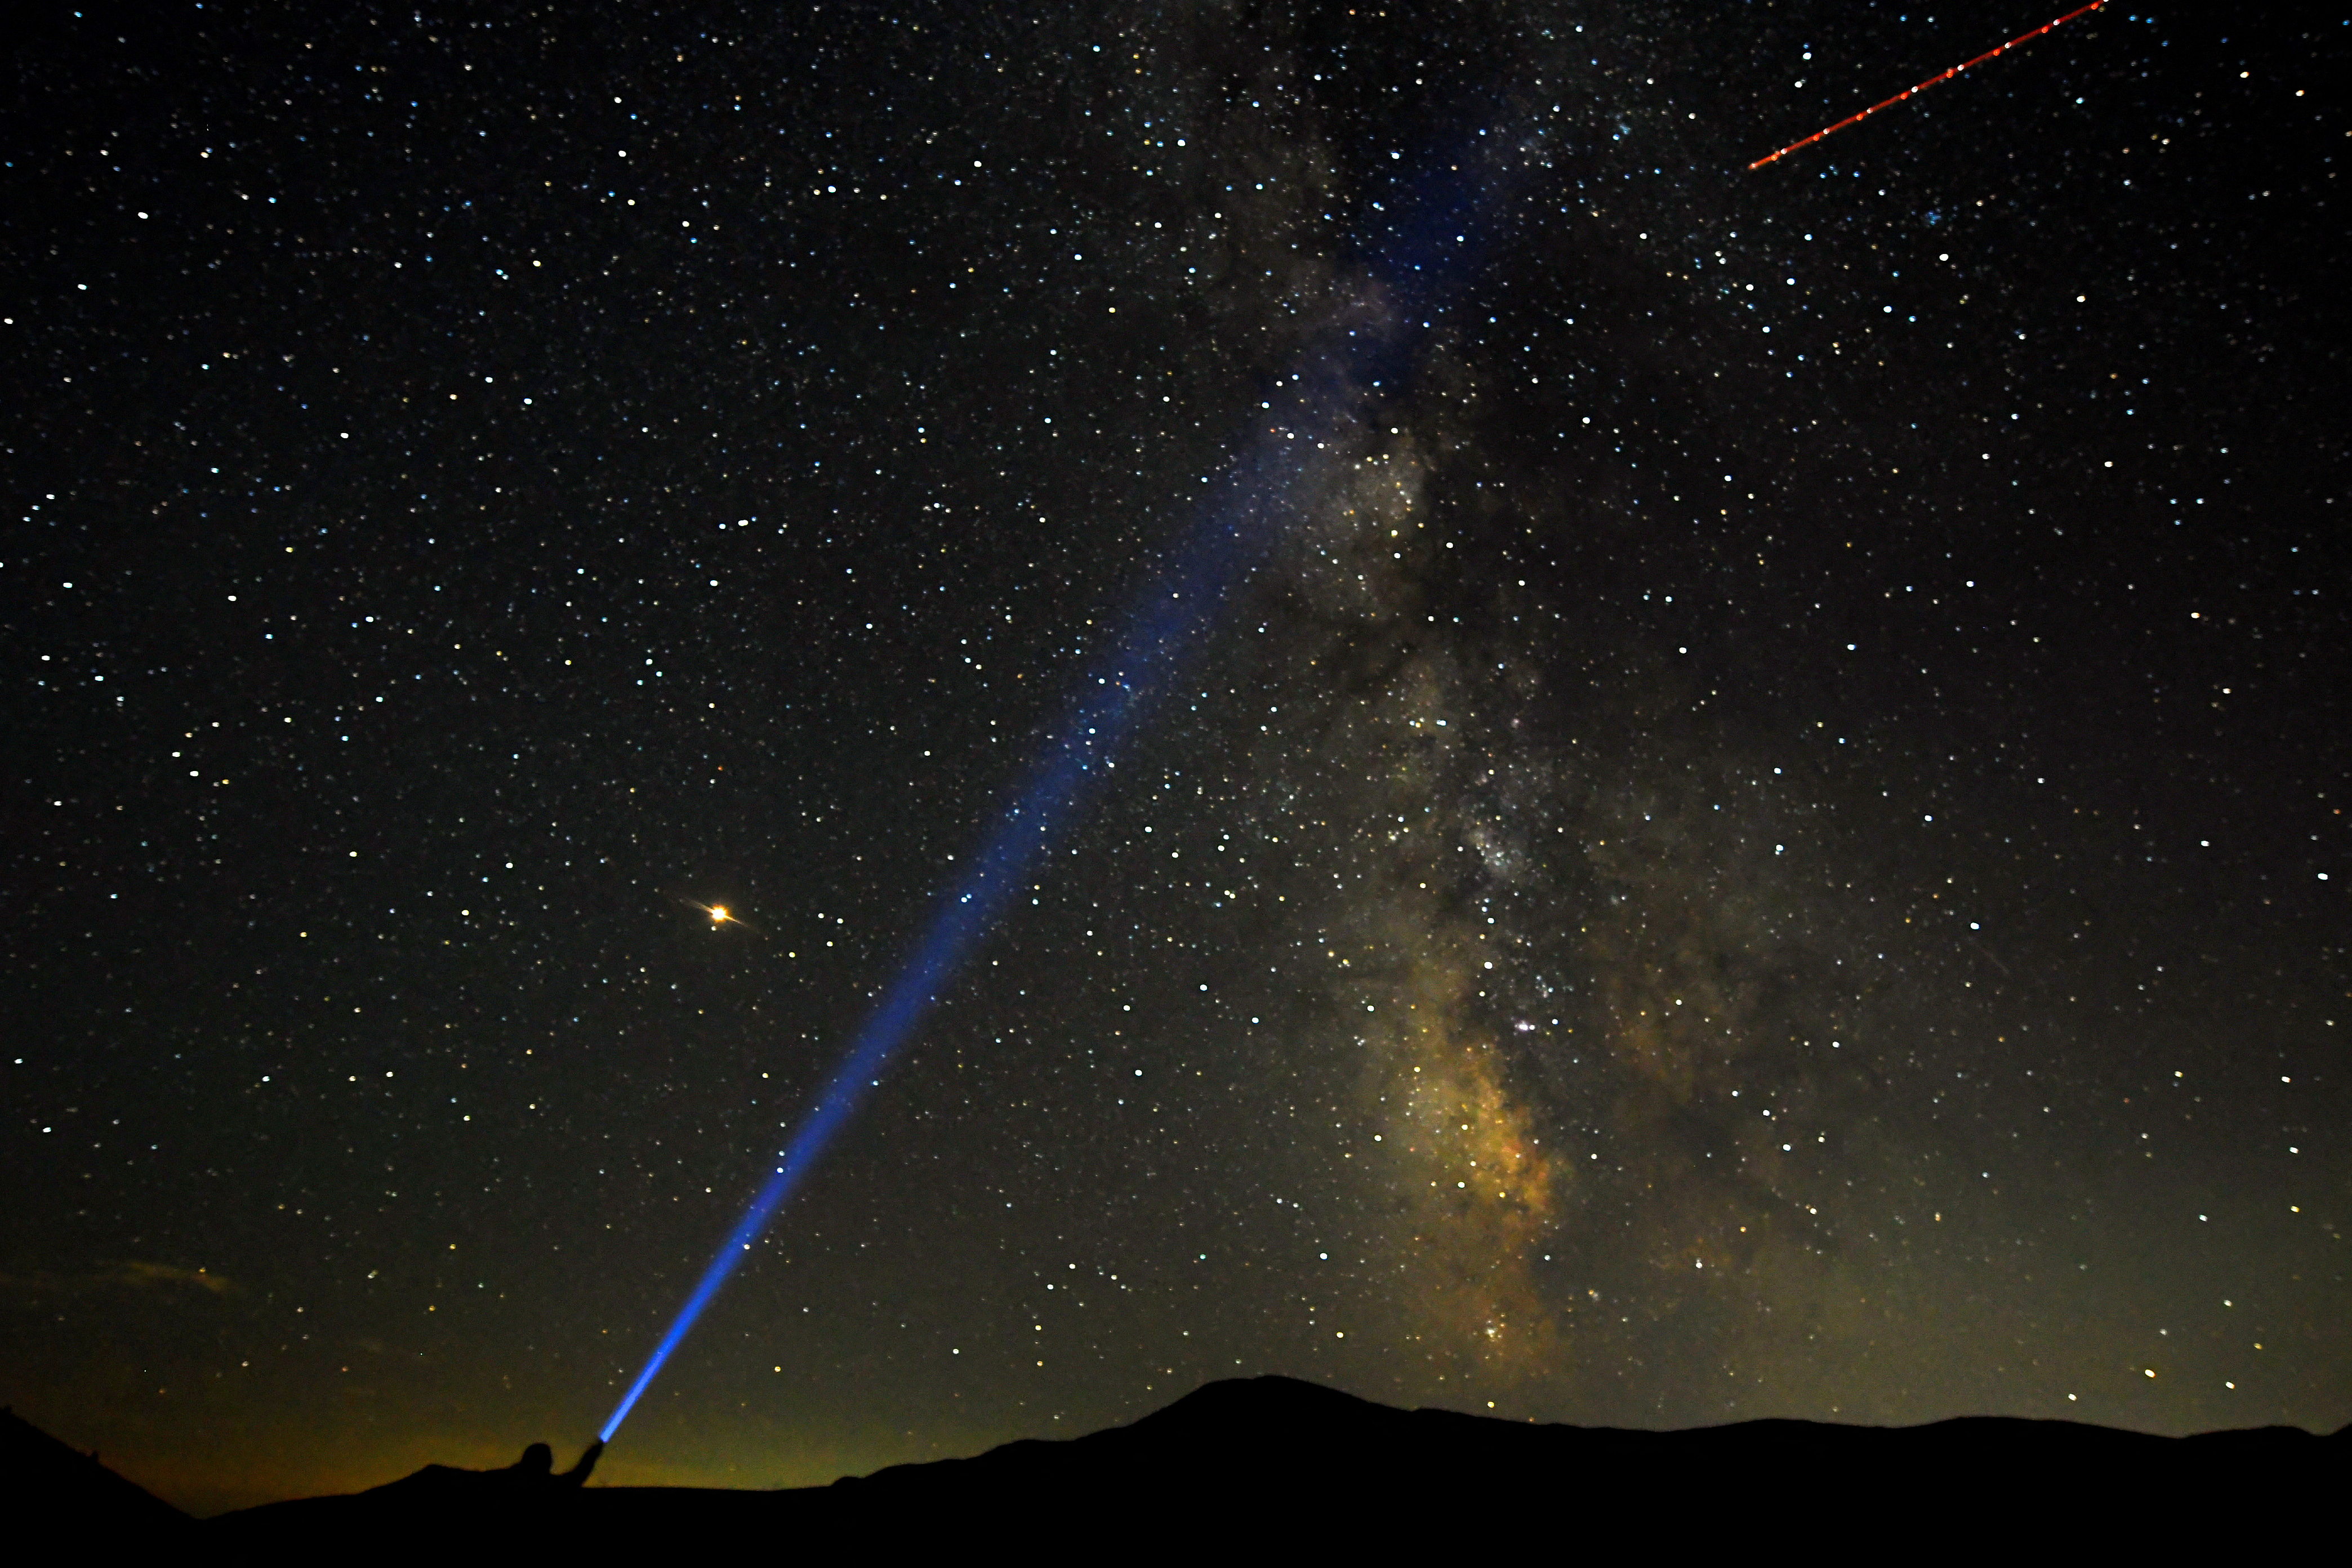 A man points his light at the Milky Way during the peak of the Perseid meteor shower in Macedonia